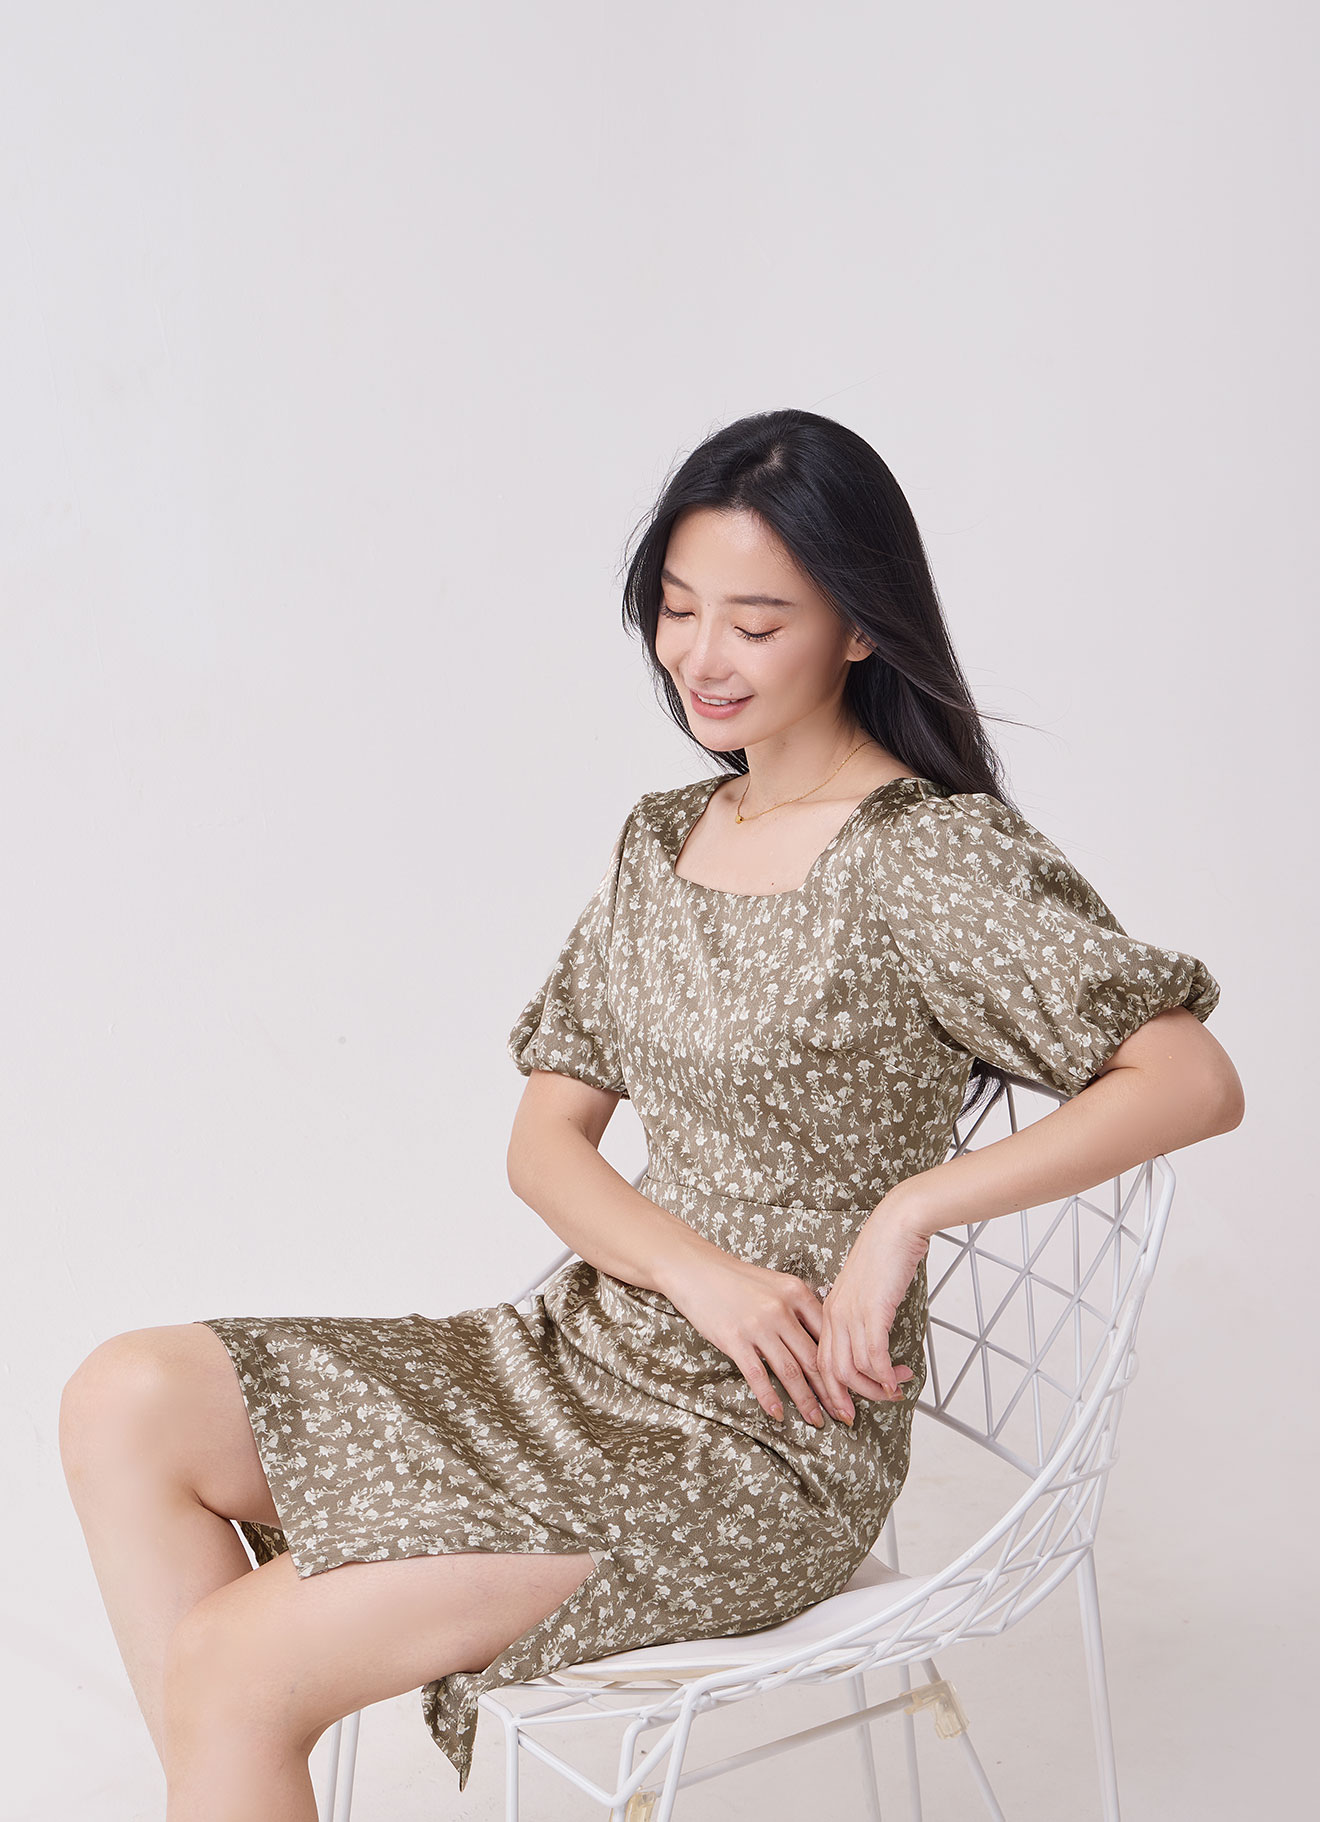 Silver-Mink by Floral Printed Dress